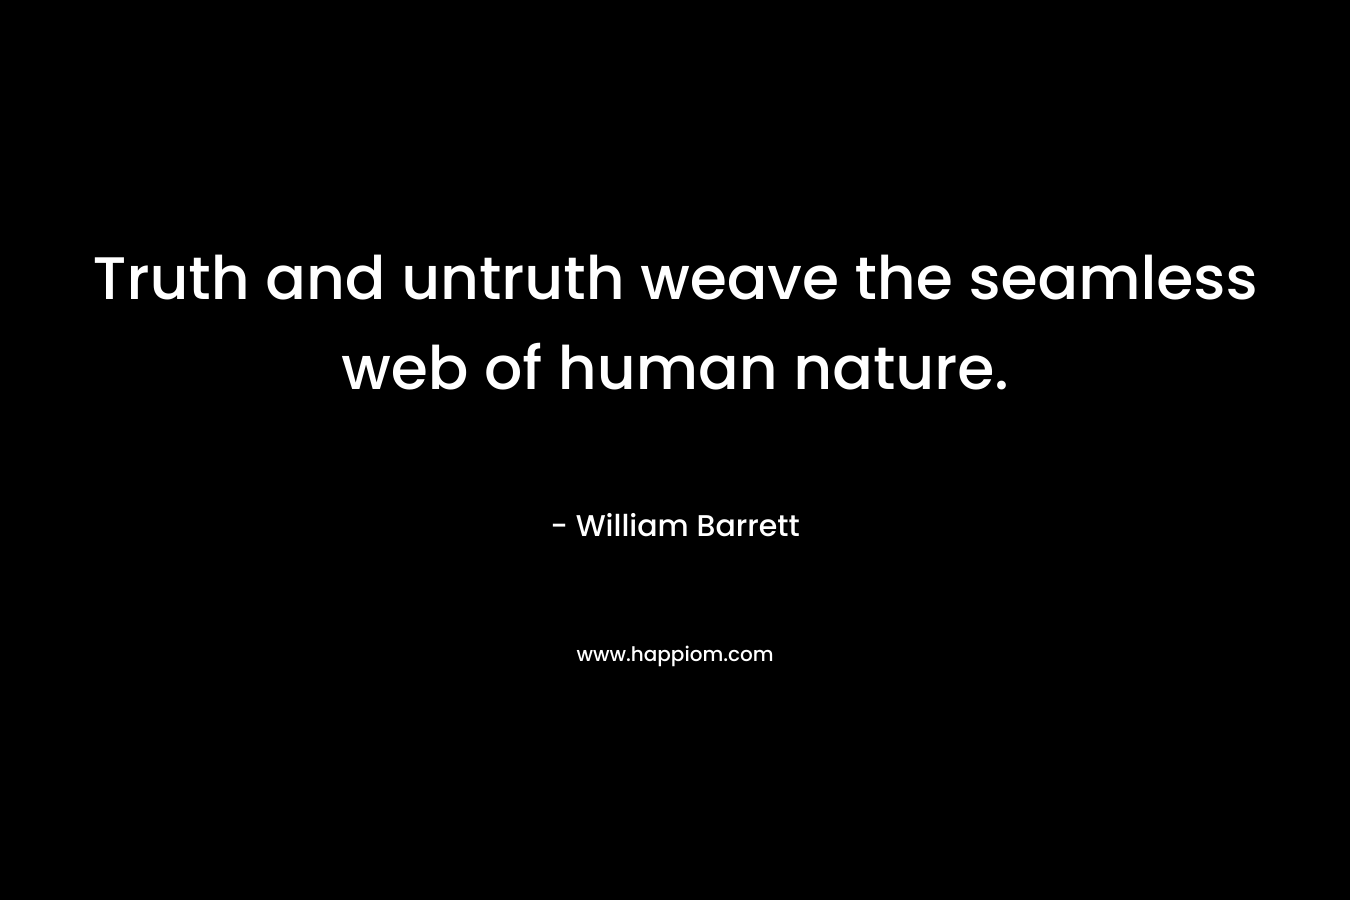 Truth and untruth weave the seamless web of human nature. – William Barrett